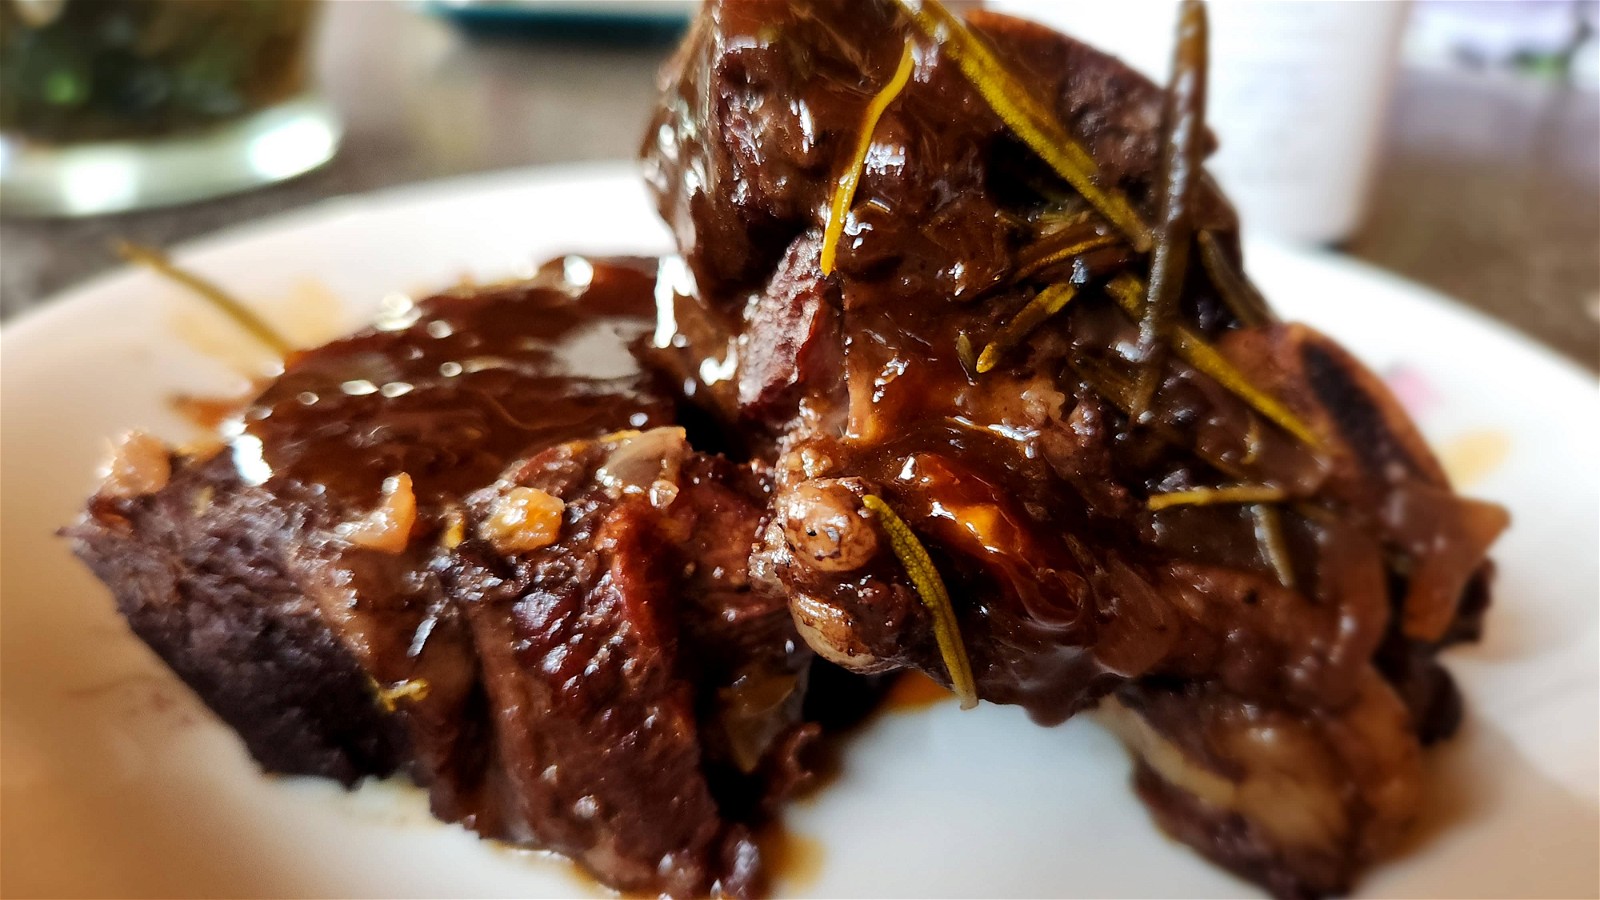 Image of Garlic Braised Short Ribs with Red Wine